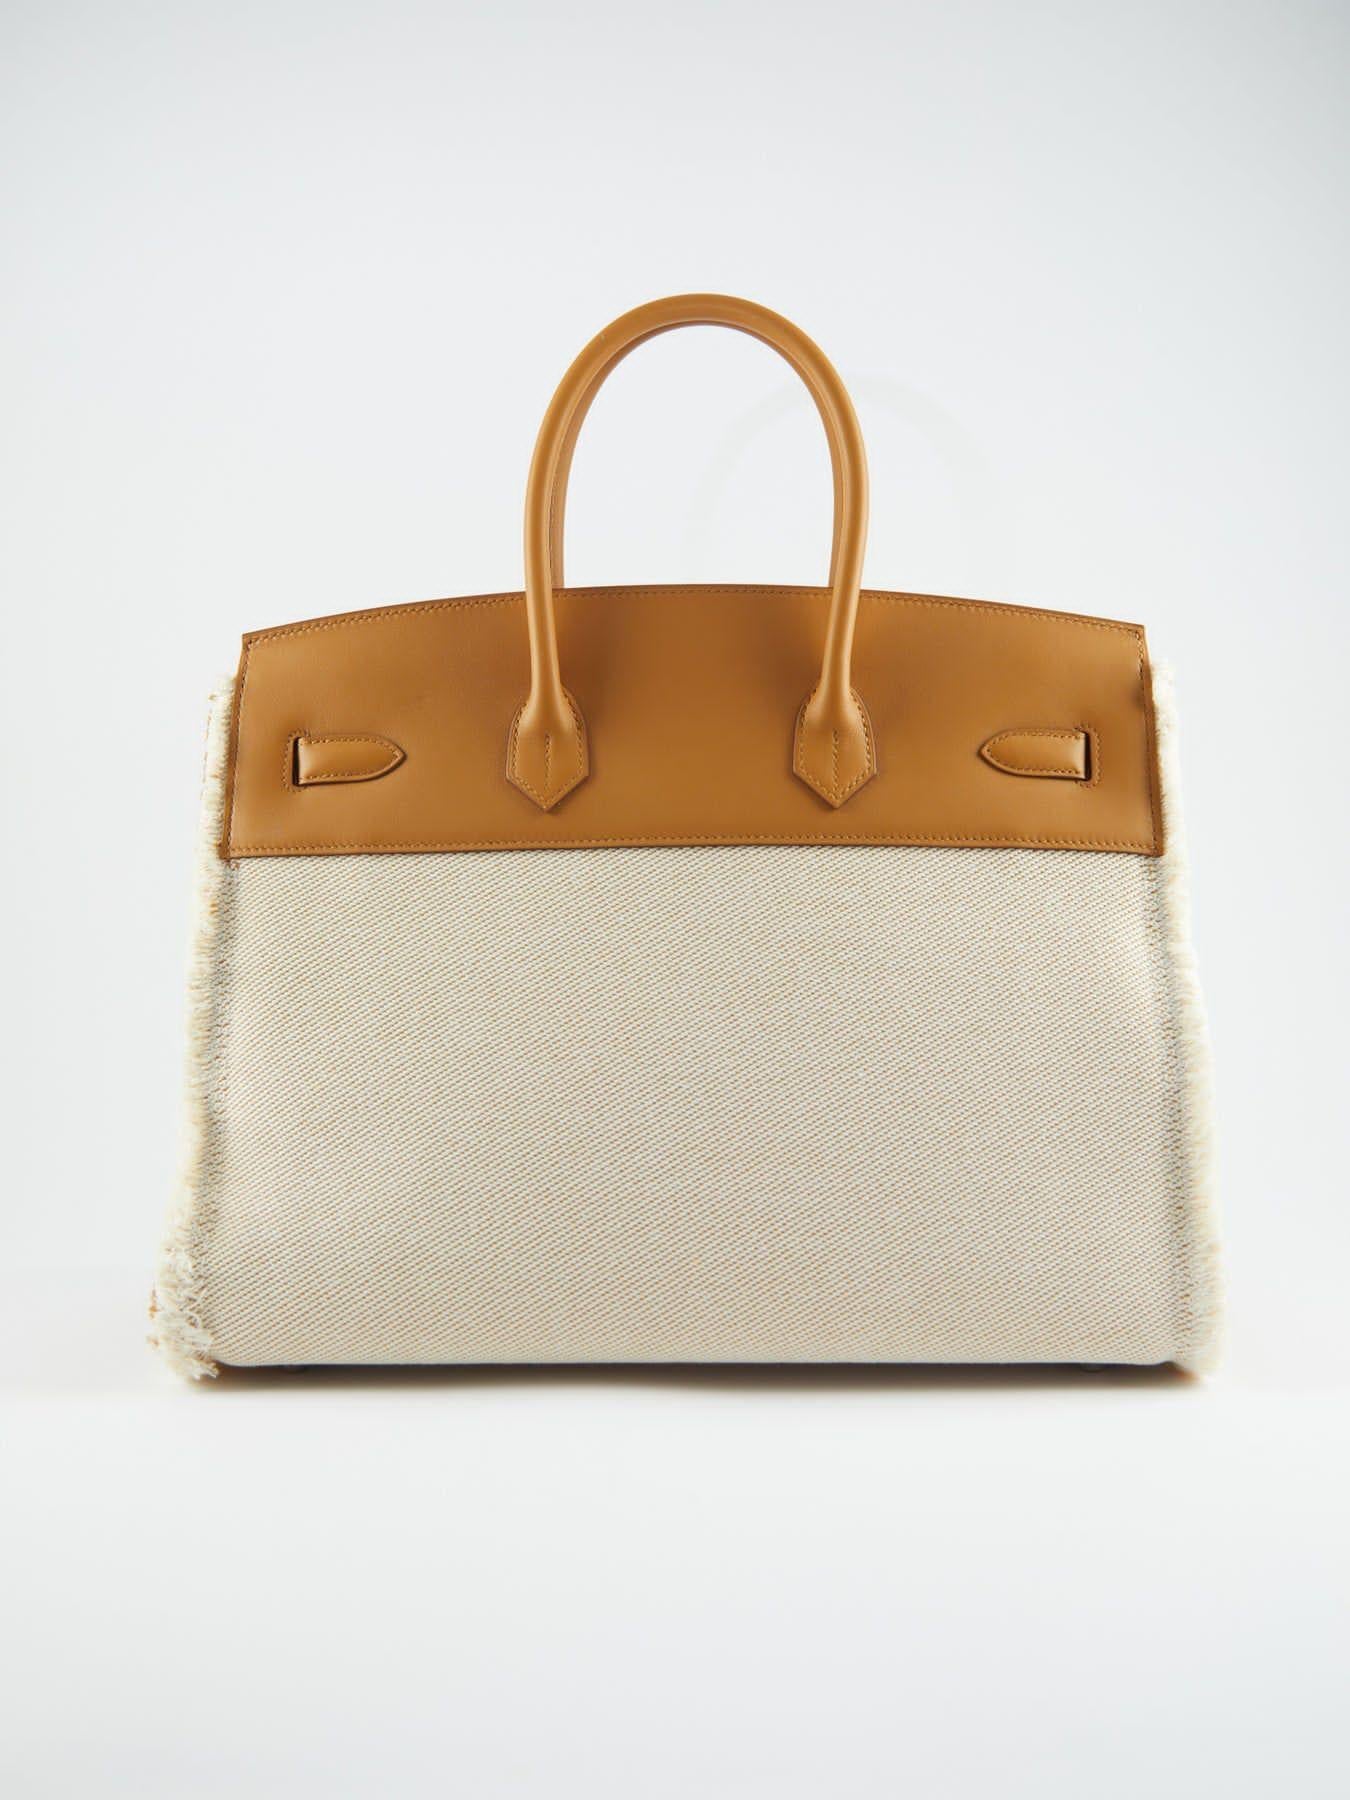 Hermes Birkin 35 cm Fray Fray handbag in beige canvas and Sésame beige leather, hardware in palladium metal, double handle in Sésame beige leather allowing the bag to be worn in the hand.
Brand new comes with everything and invoice 
Year : 2022.